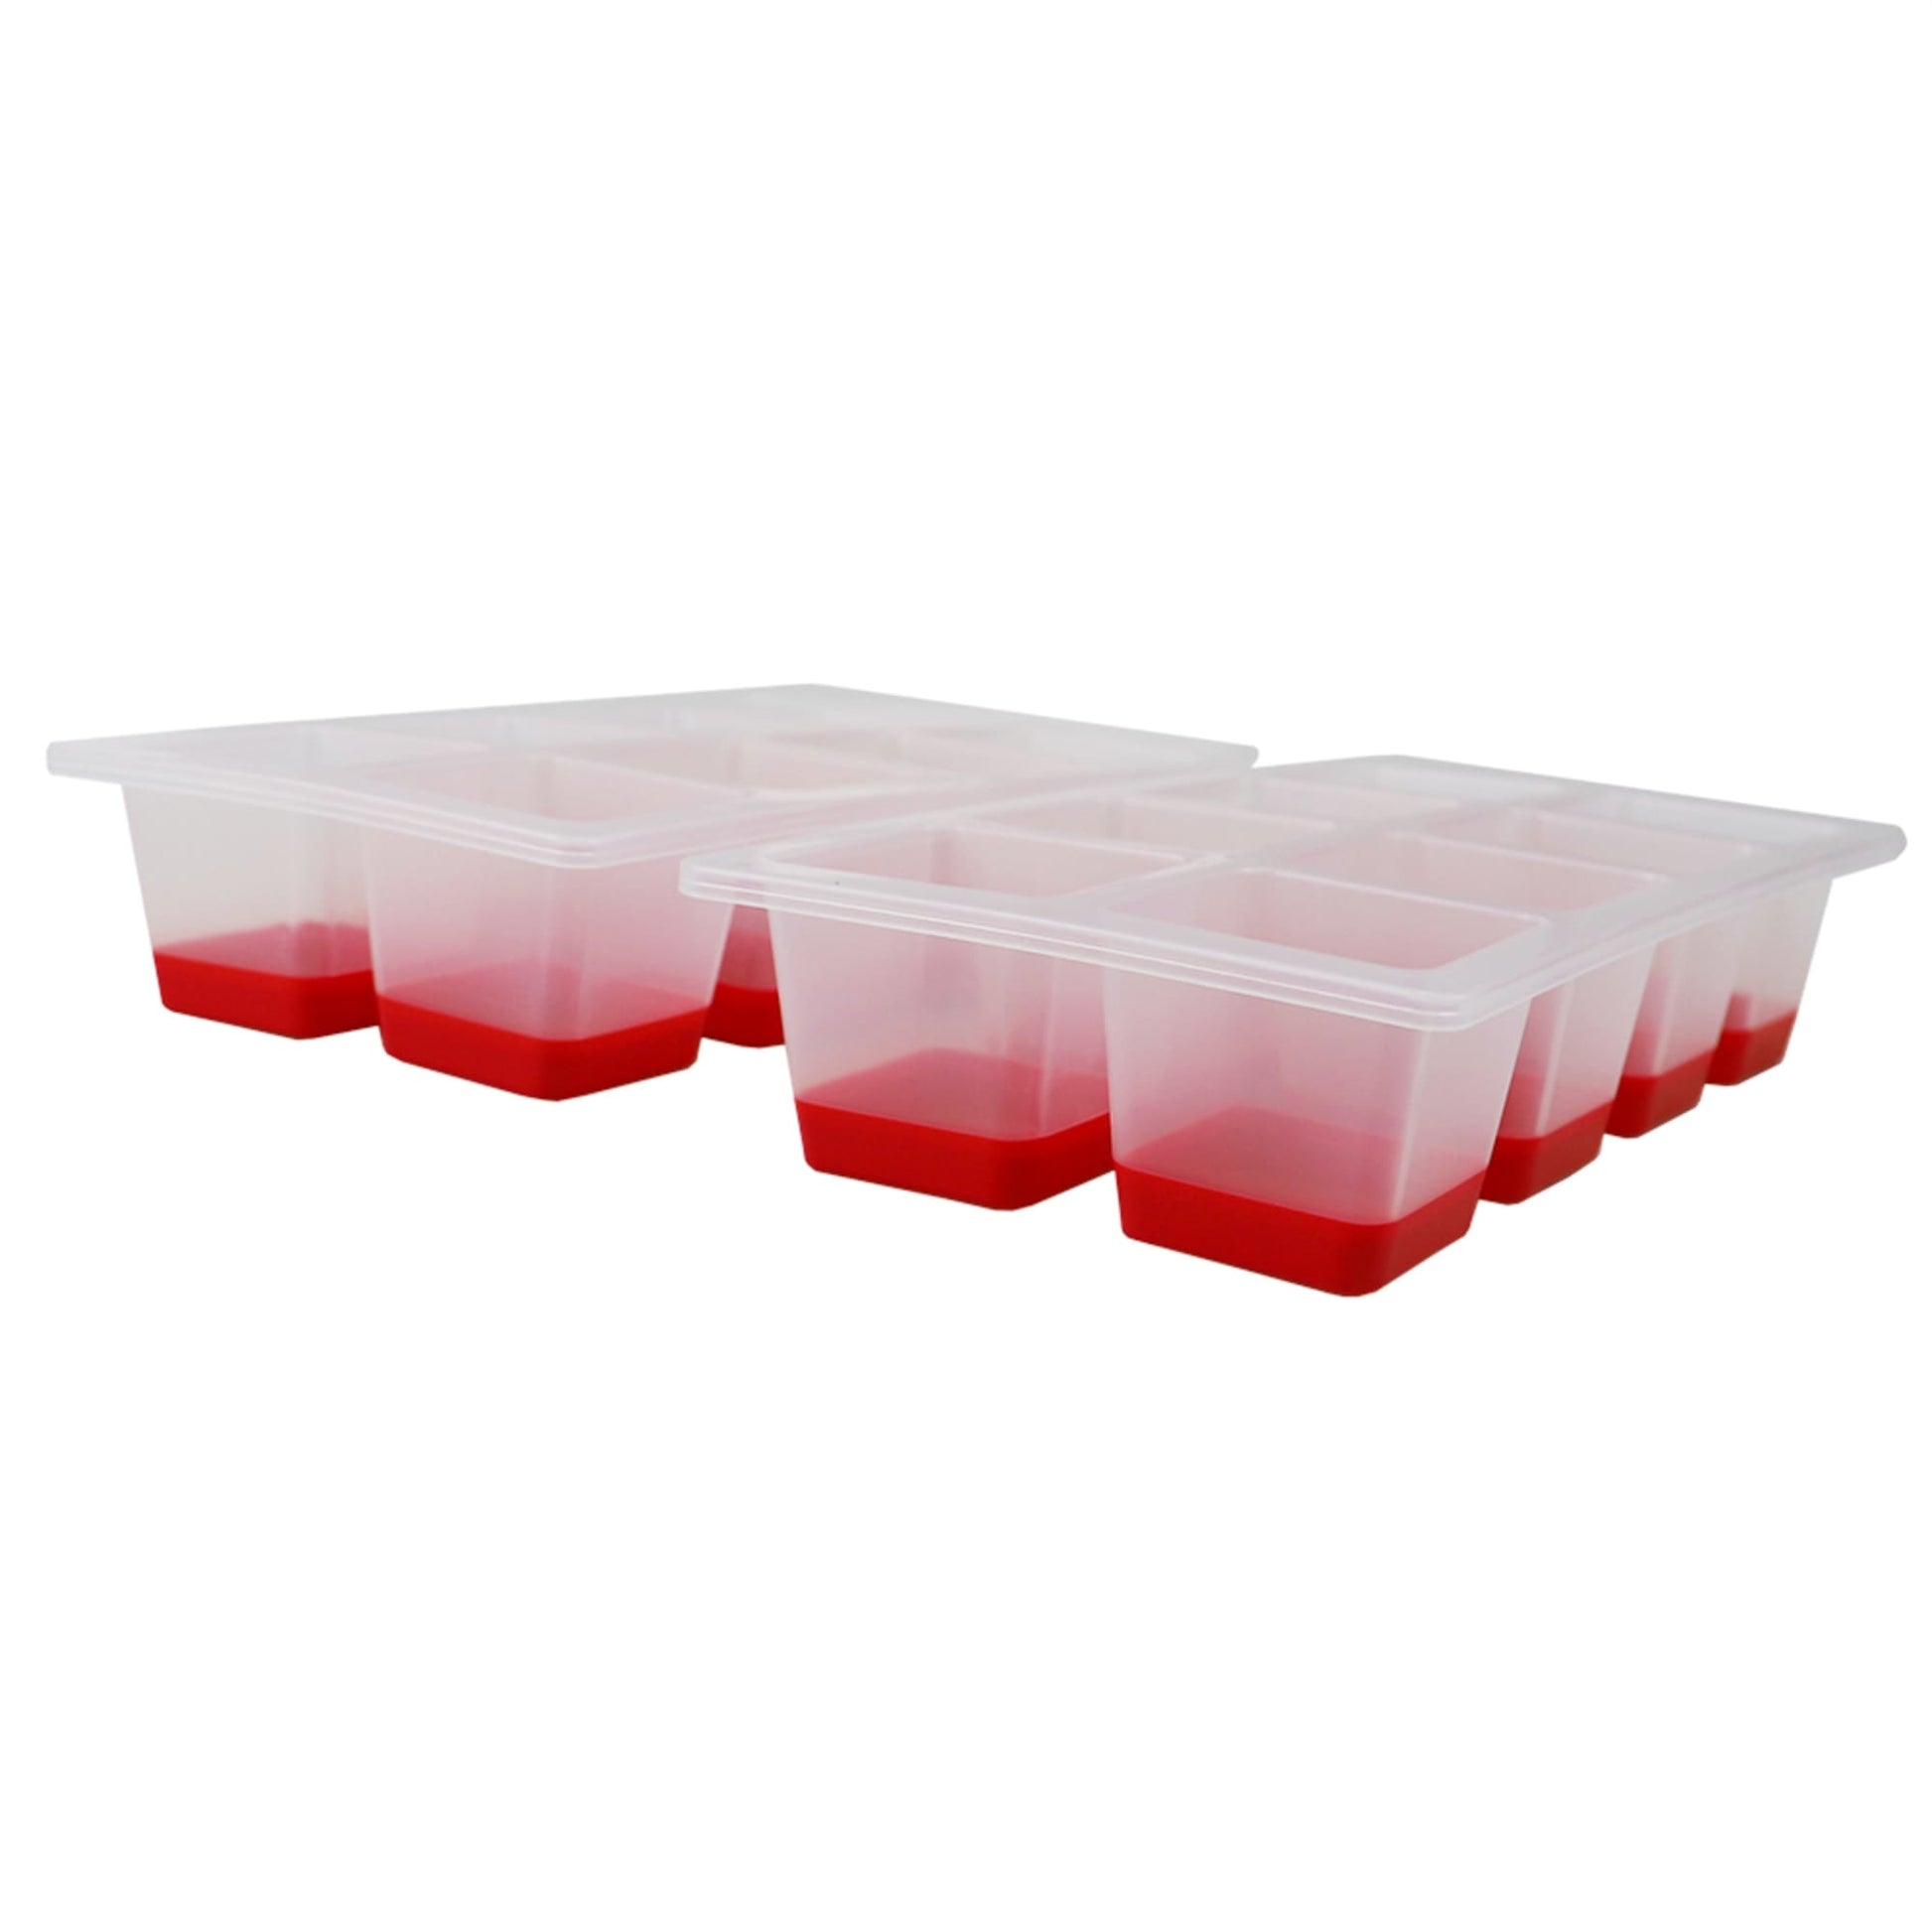 Ofspeizc Plastic Ice Cube Trays for Freezer, Ice Cubes per Tray with Easy-Release Design, Red